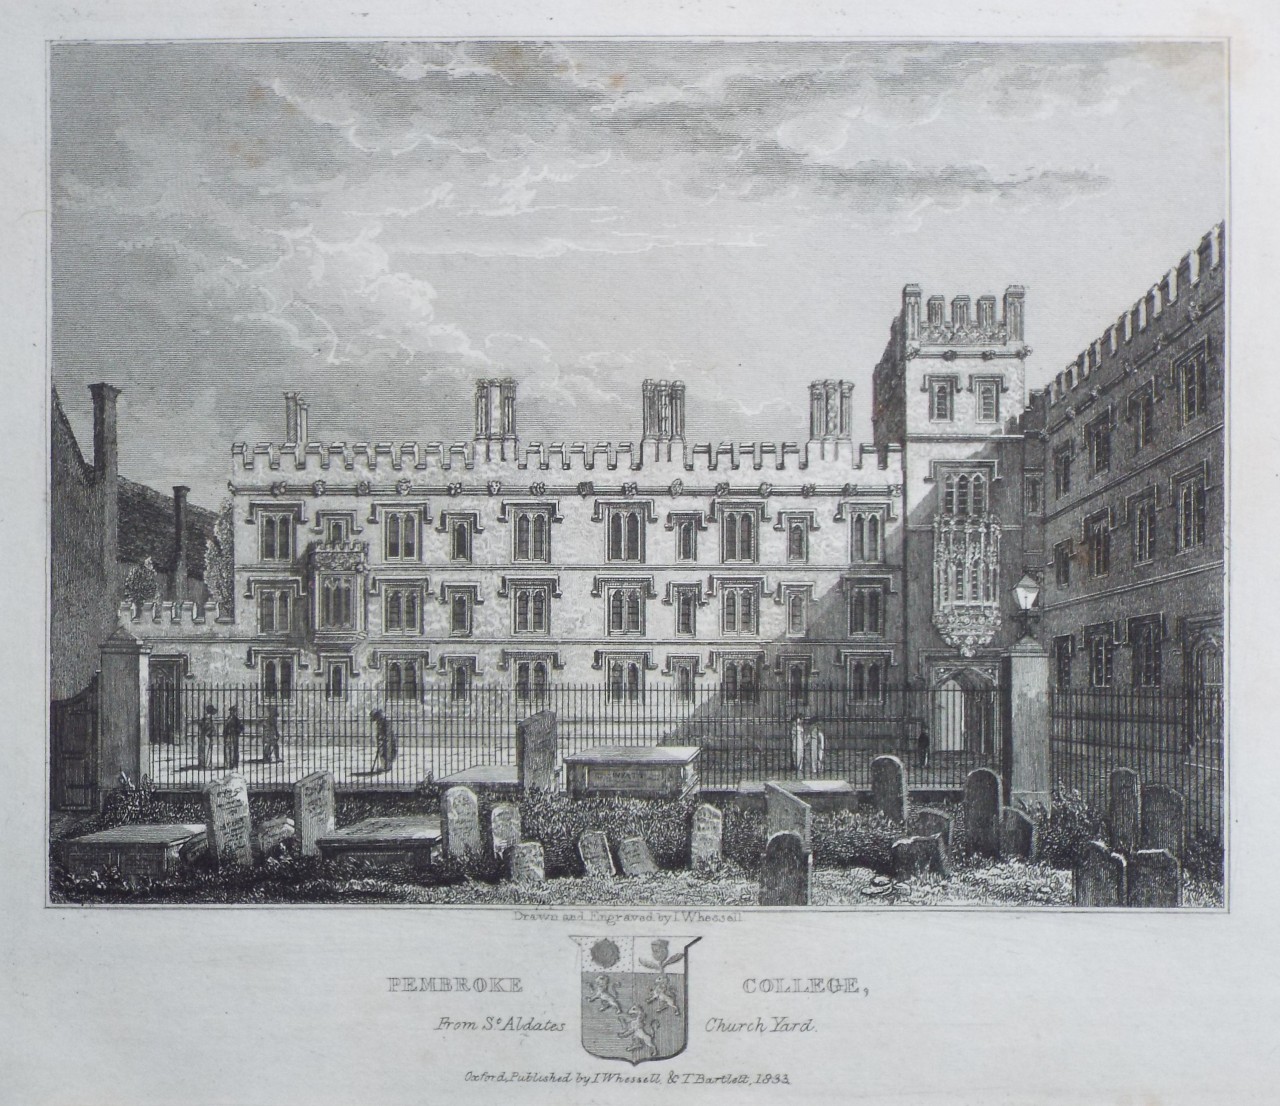 Print - Pembroke College, from St. Aldate's Church Yard - Whessell